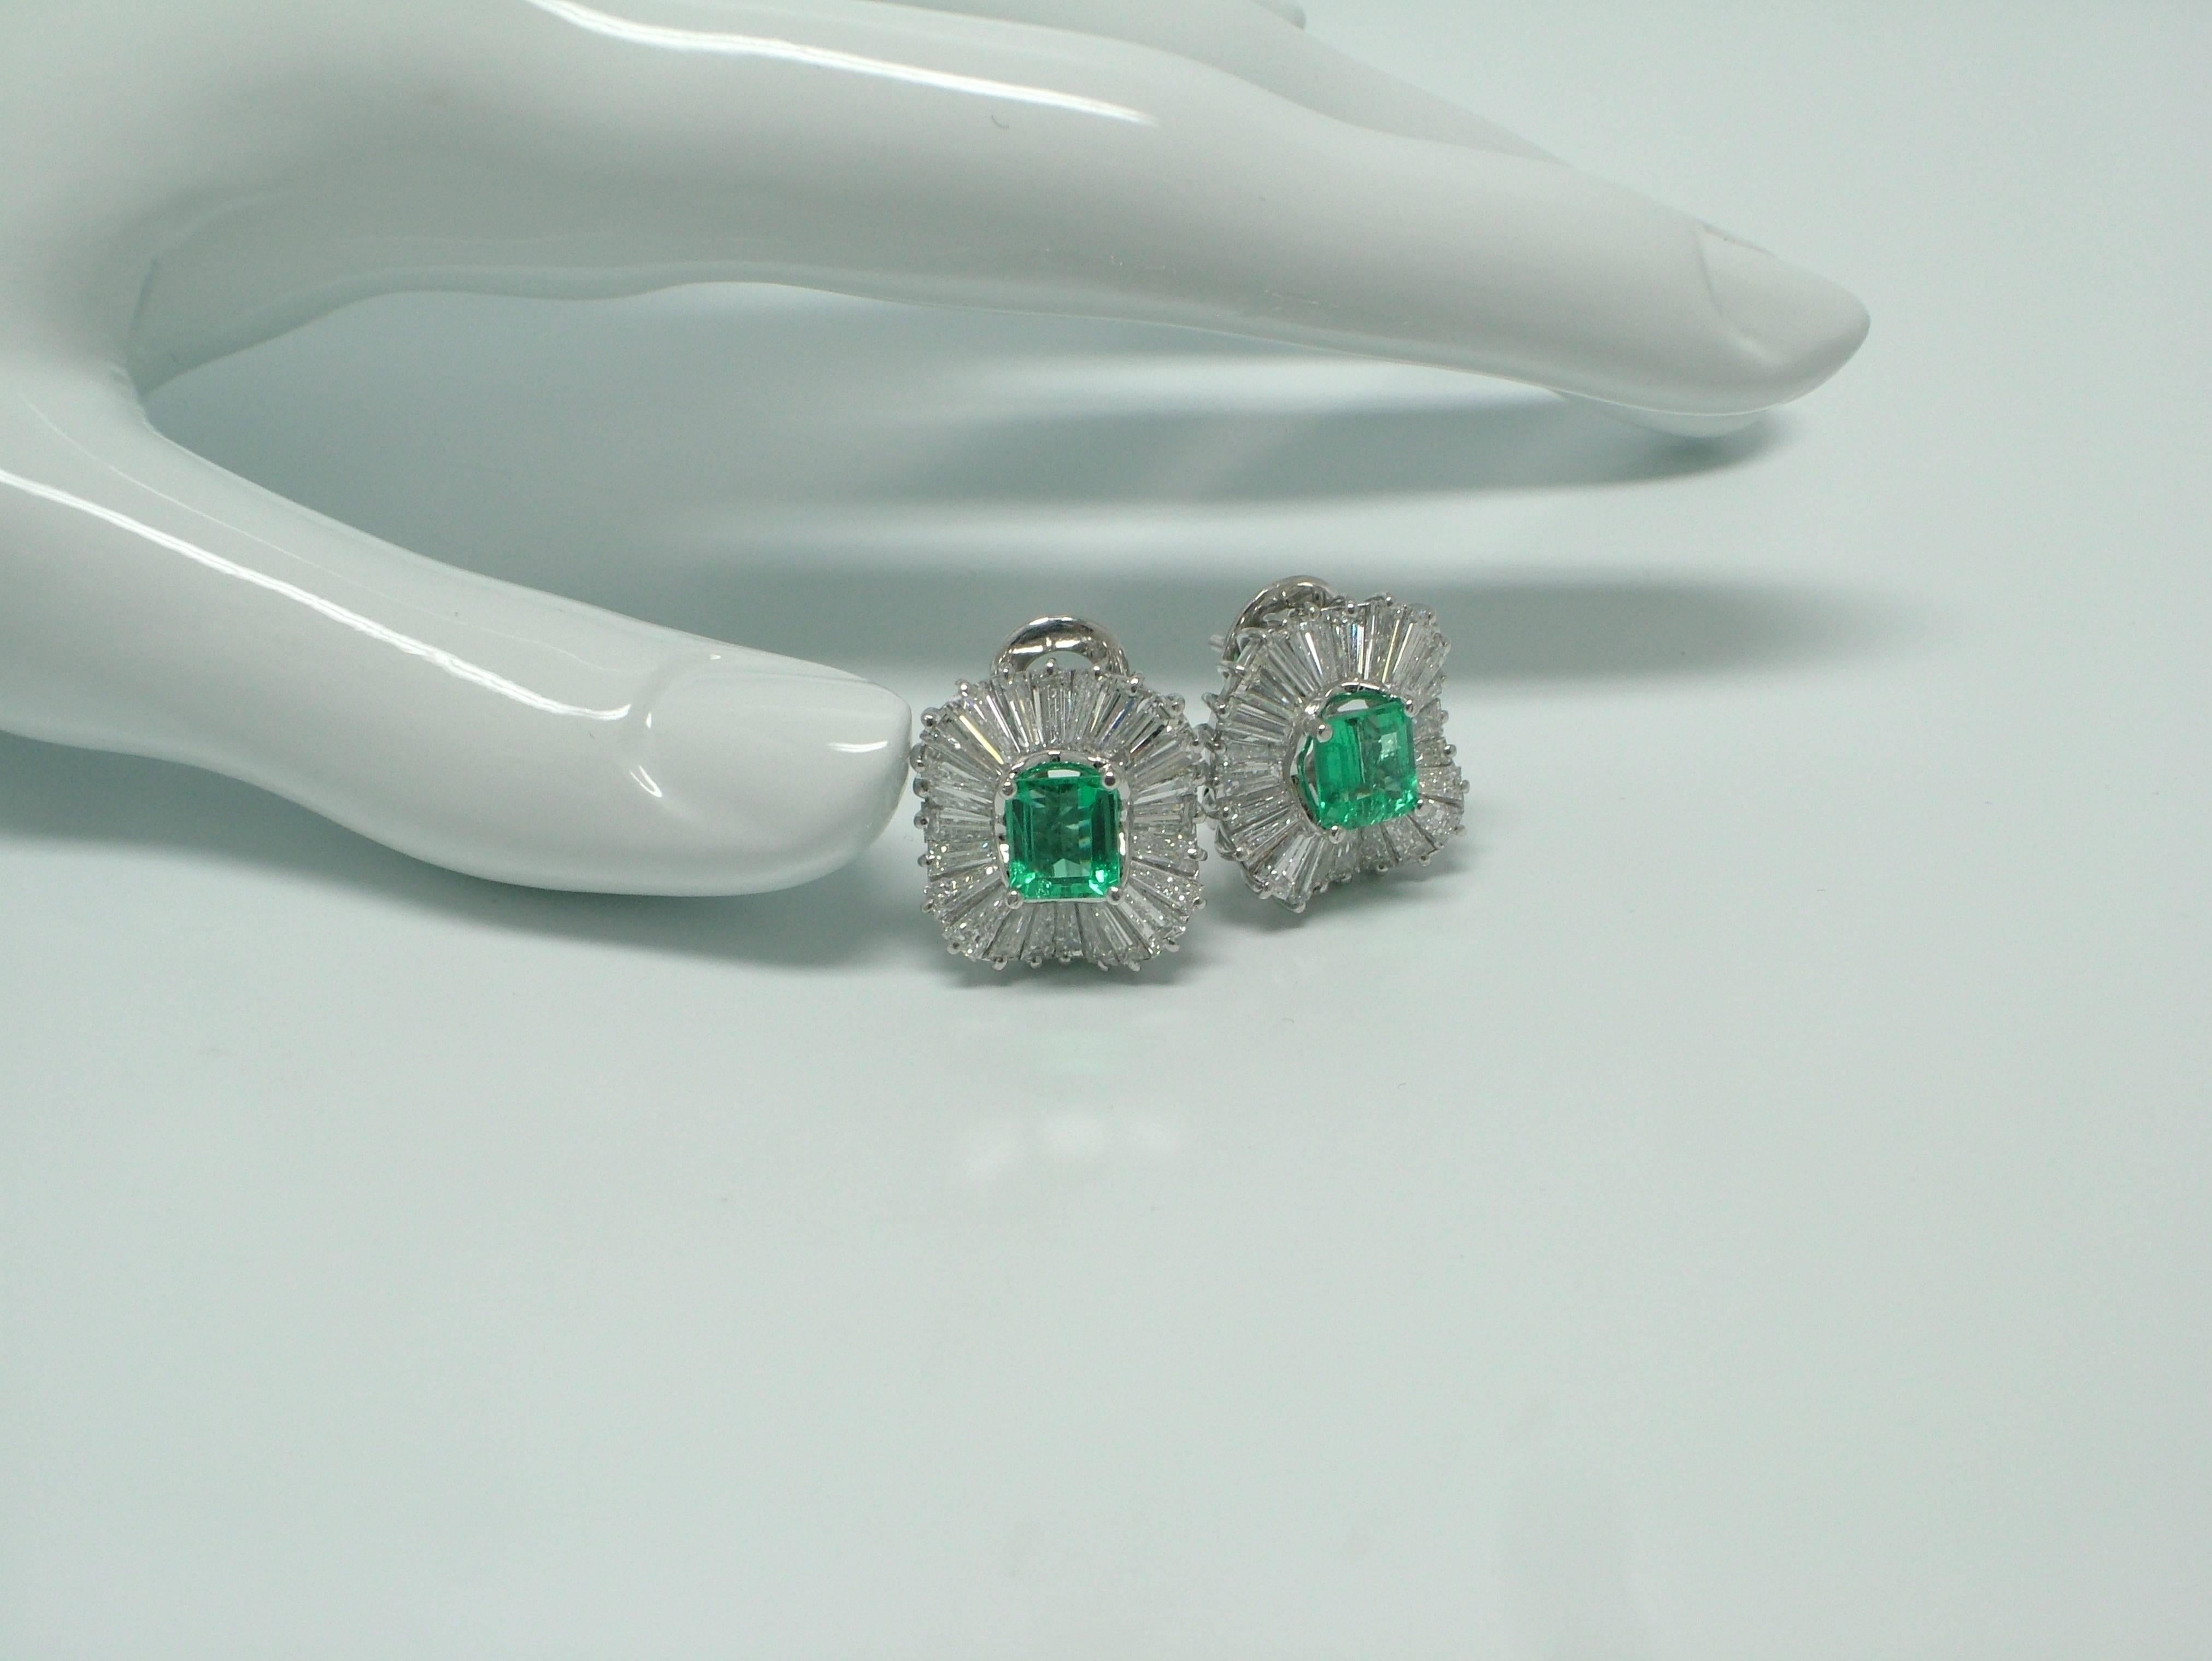 A pair of 18 karat white gold, diamond and emerald earrings.  In the center with 2 emeralds weighting 2,80ct. surrounded by tapered  baguette-cut diamonds weighing approx. 7,50ct. 
Emerald measures: 6,8x6mm
